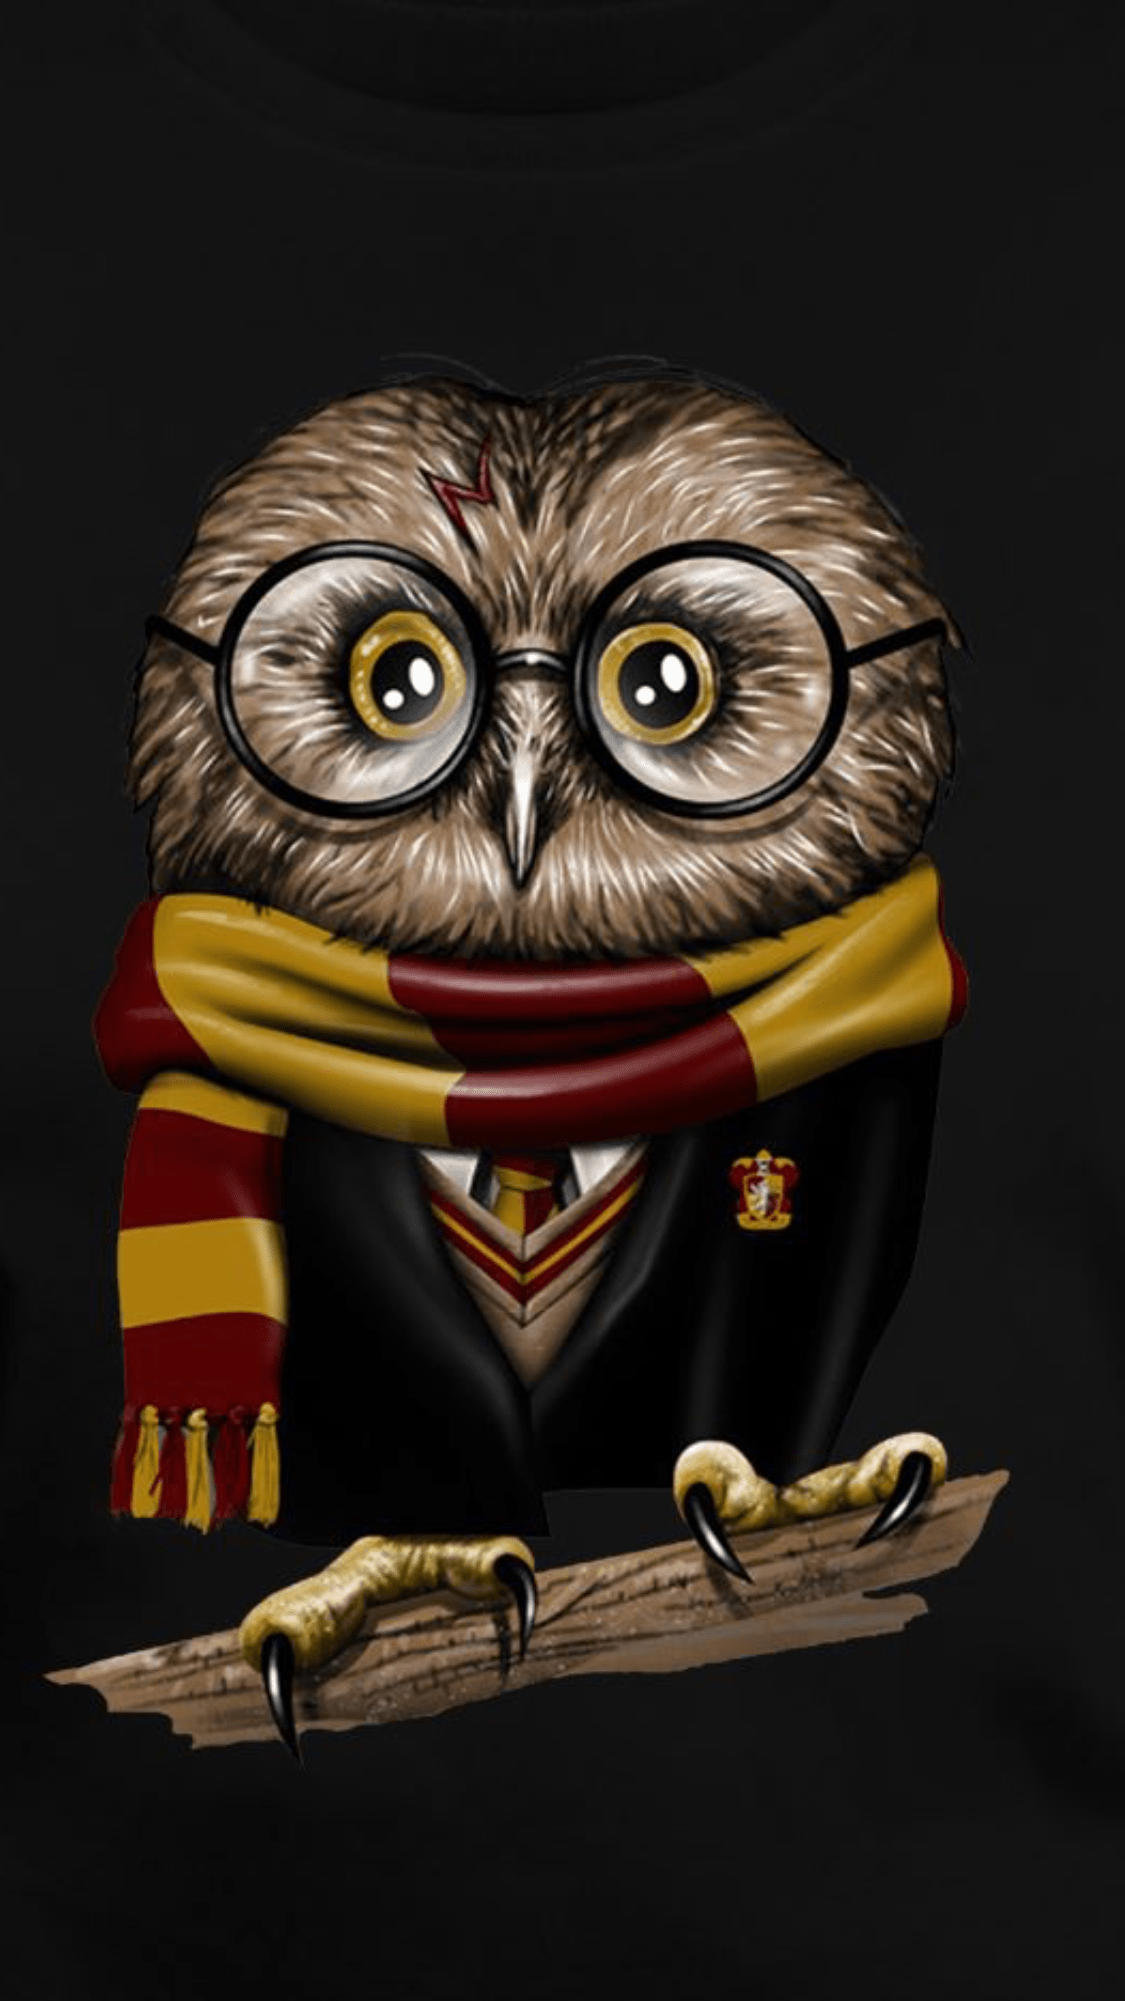 Harry Potter Owl Wallpapers - Top Free Harry Potter Owl Backgrounds